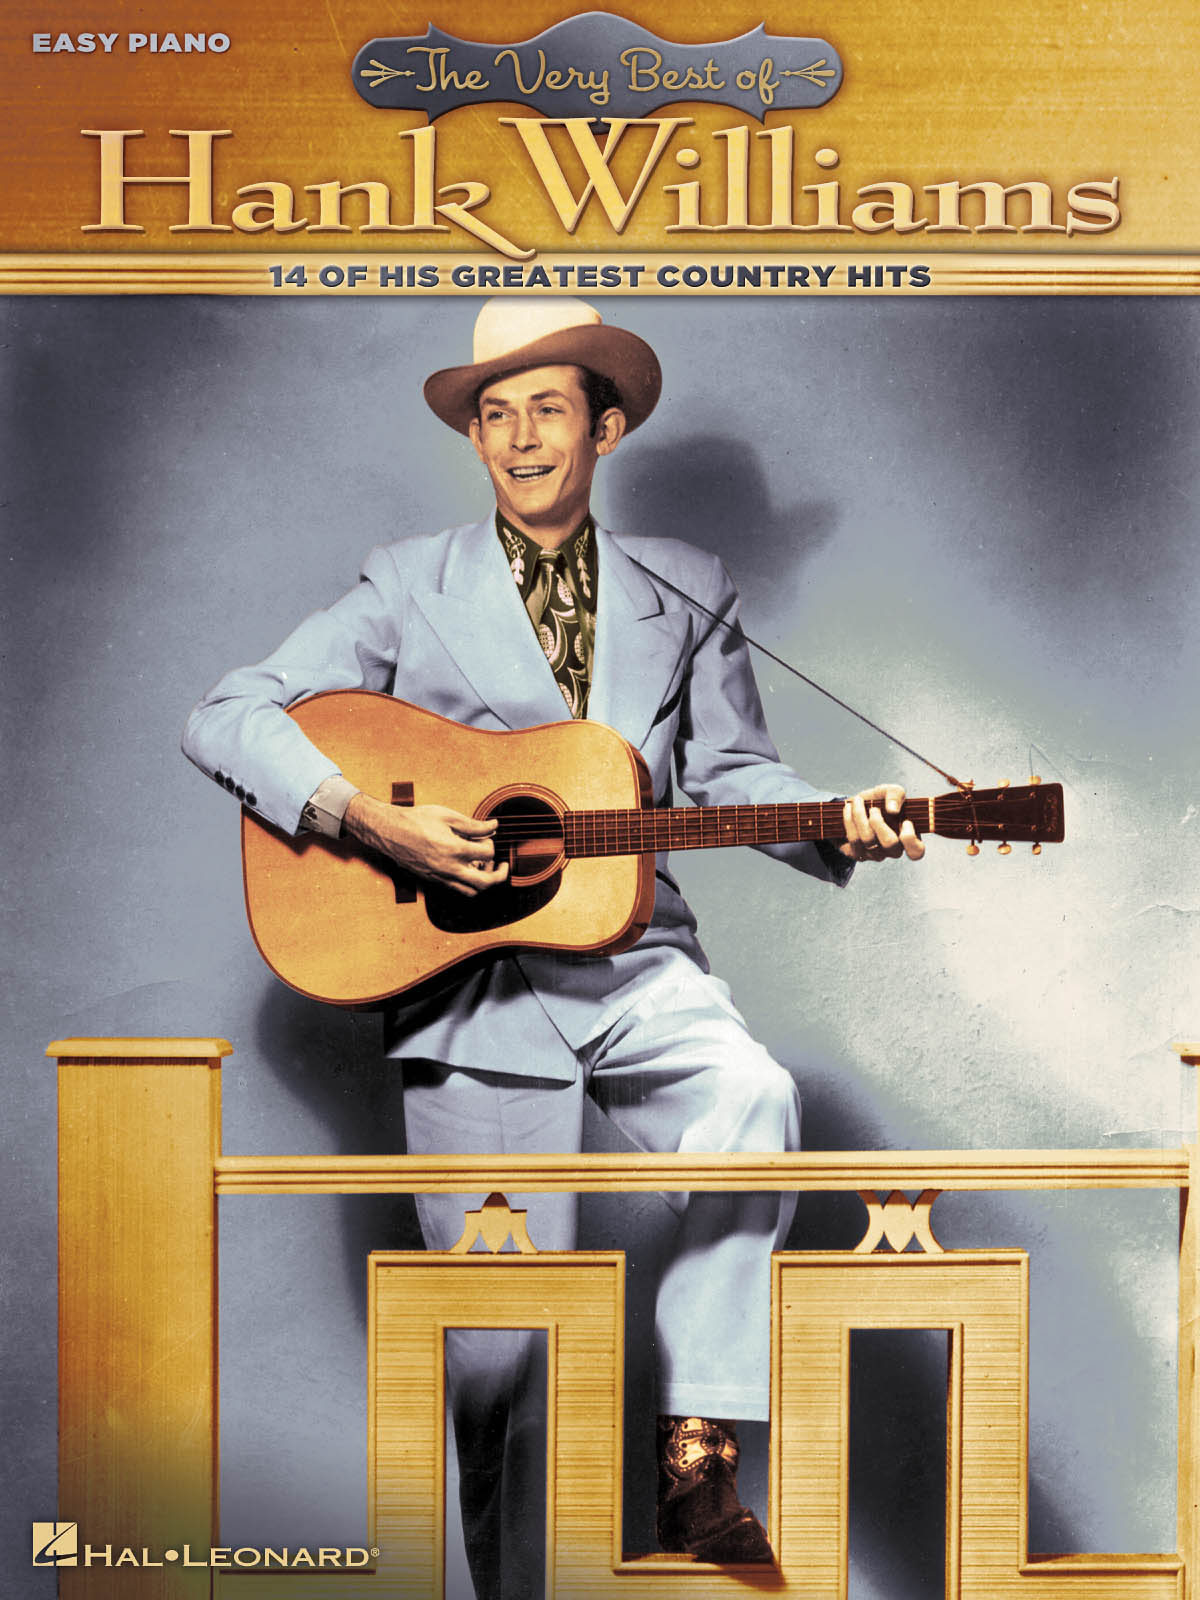 The Very Best of Hank Williams(14 of His Greatest Country Hits)